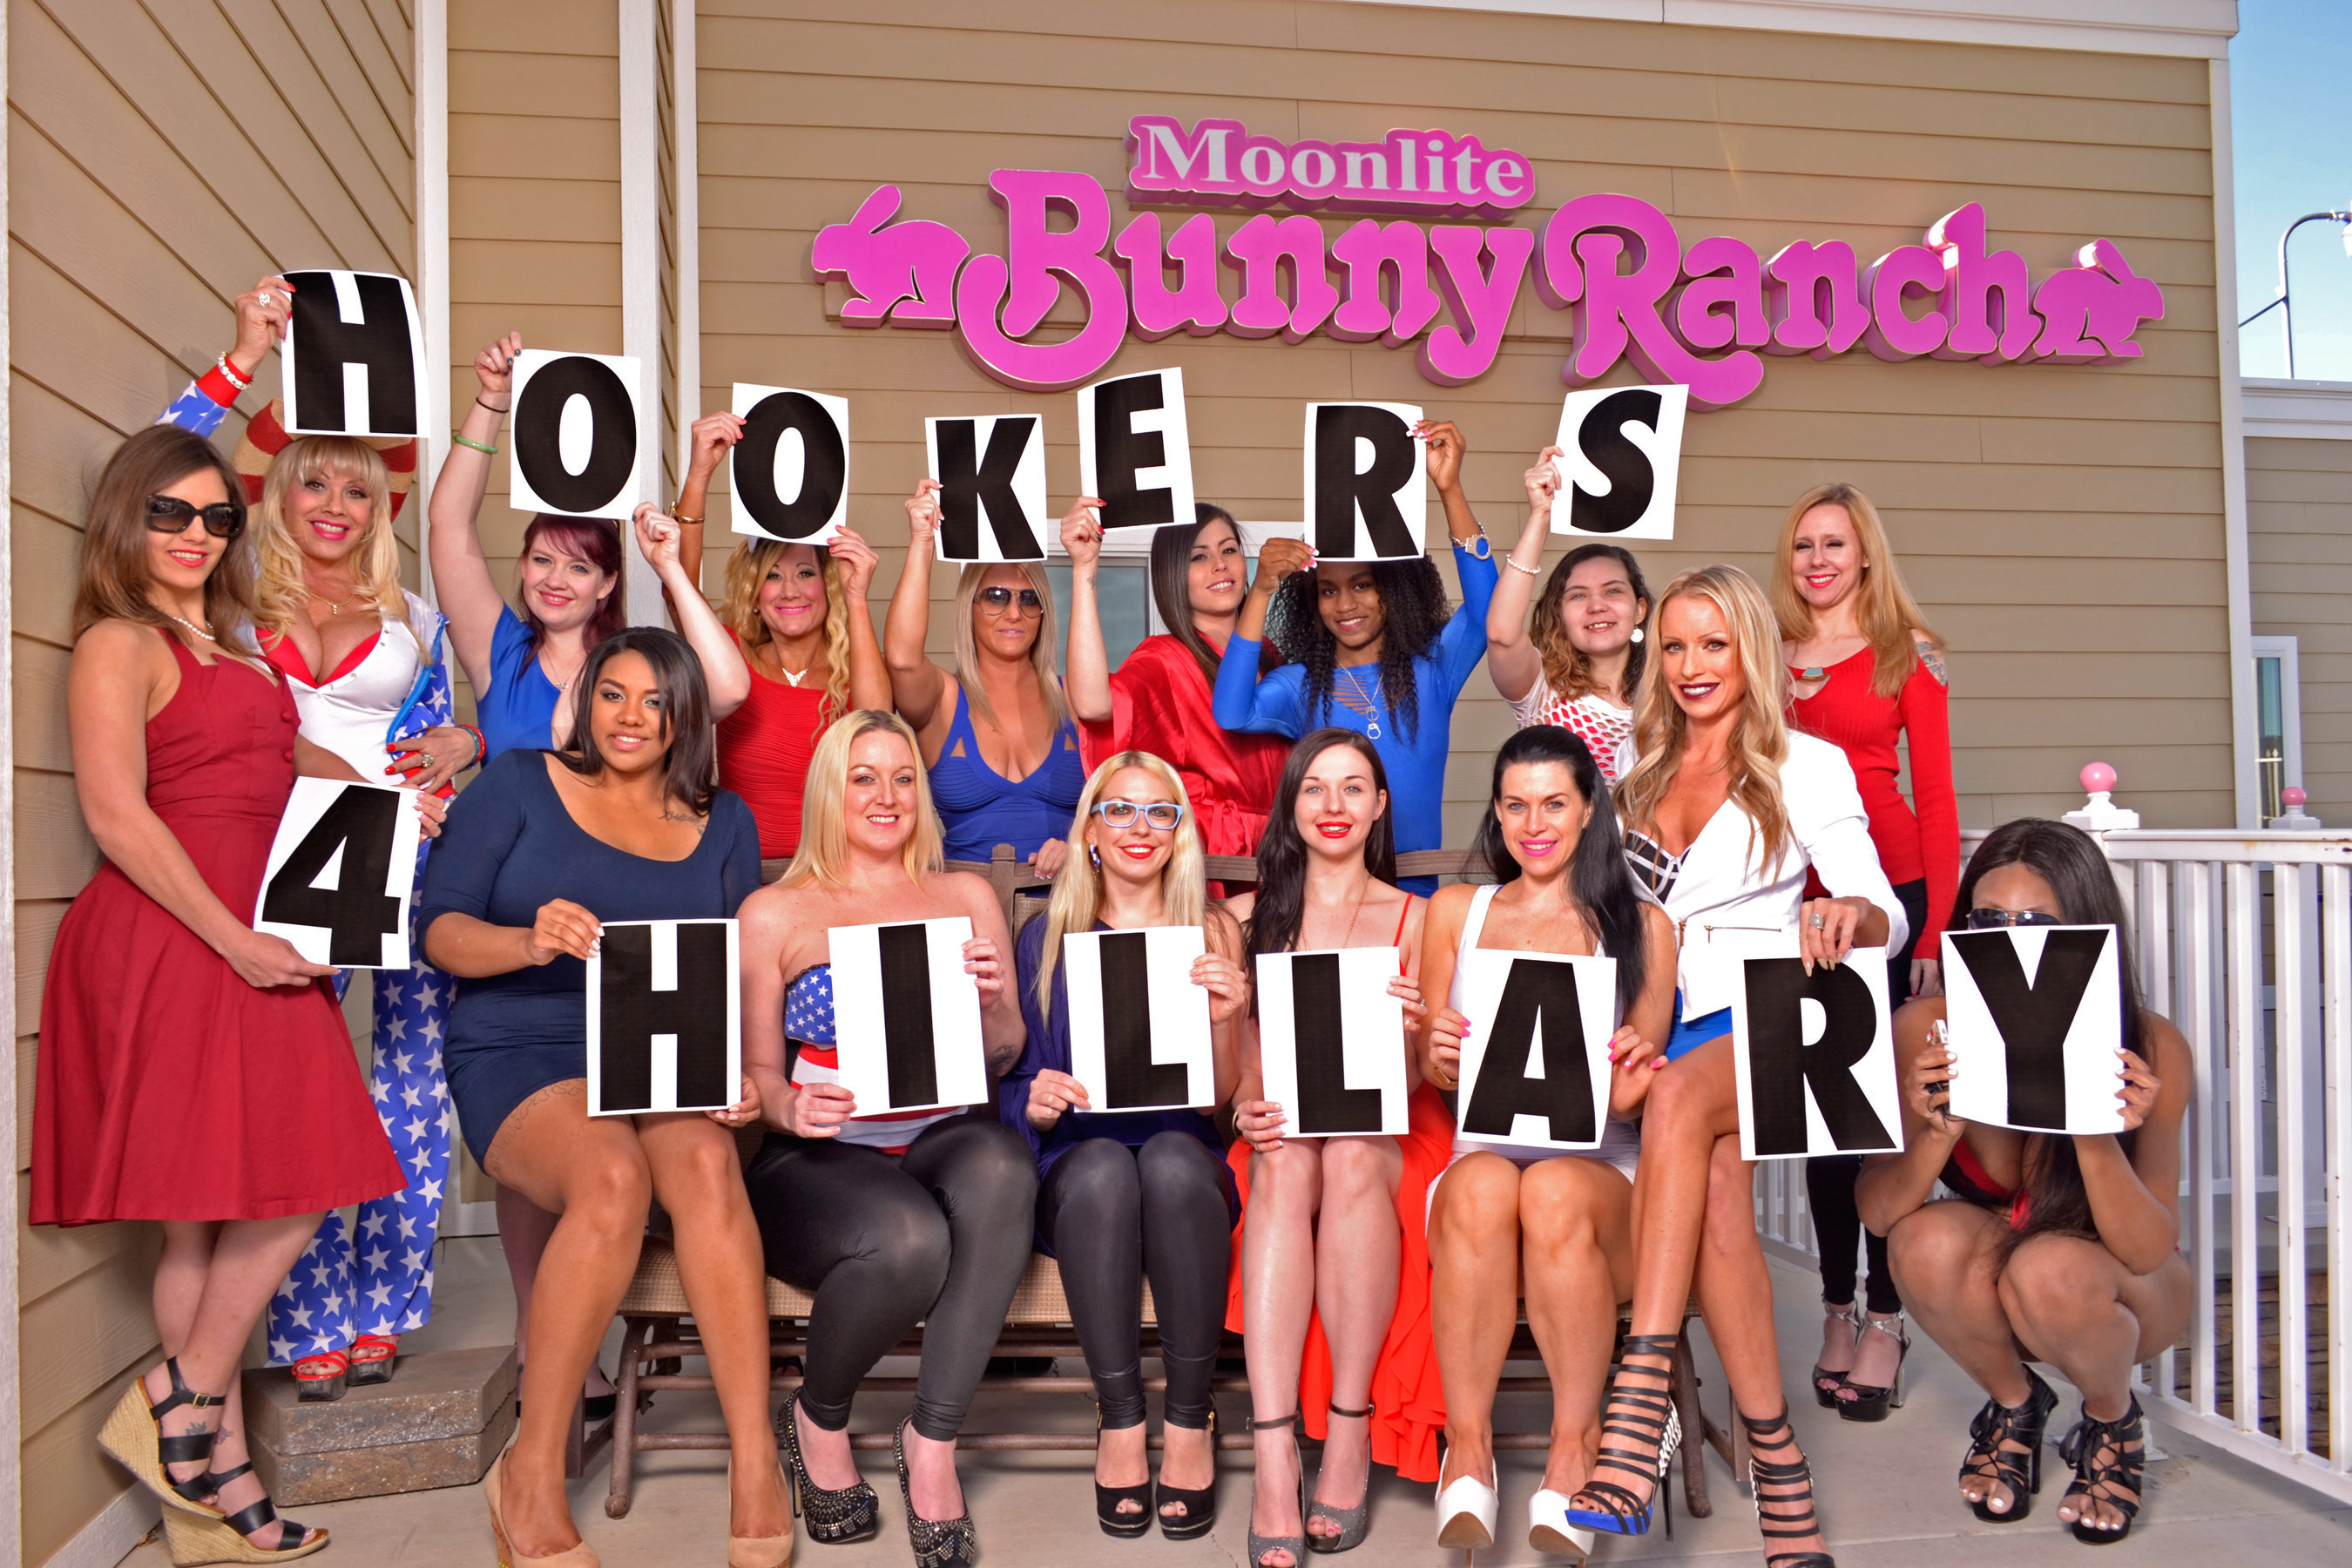 Hookers For Hillary! Bunny Ranch Sex Workers Announce Endorsement Of Hillary Clinton For President. Prostitutes at Dennis Hof's world famous "Moonlite Bunny Ranch" legal brothel in Carson City, Nevada are banding together to announce their support of the Hillary Clinton presidential campaign.  Following Clinton's formal announcement, the sex workers launched their "Hookers For Hillary" initiative, drafting a four-point platform to explain their endorsement. More information at www.hookersforhillary.com #hookersforhillary